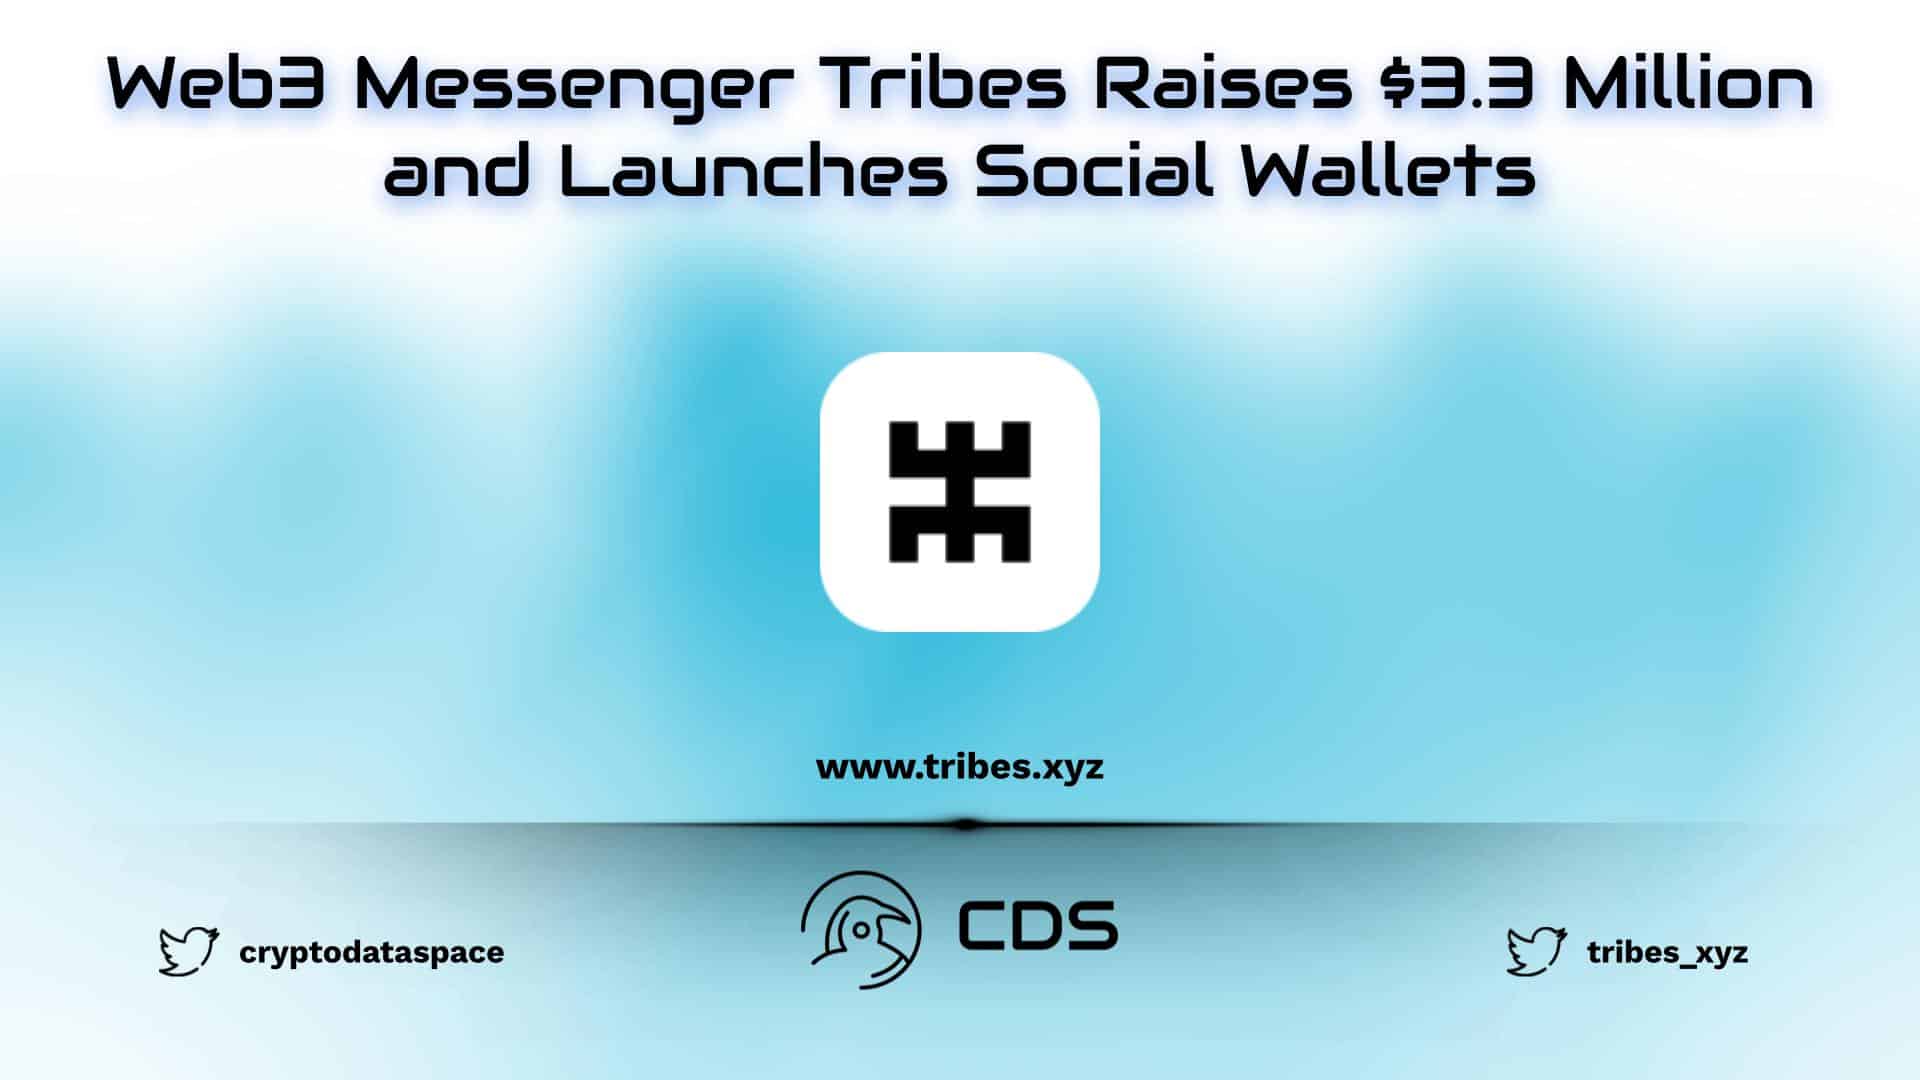 Web3 Messenger Tribes Raises $3.3 Million and Launches Social Wallets